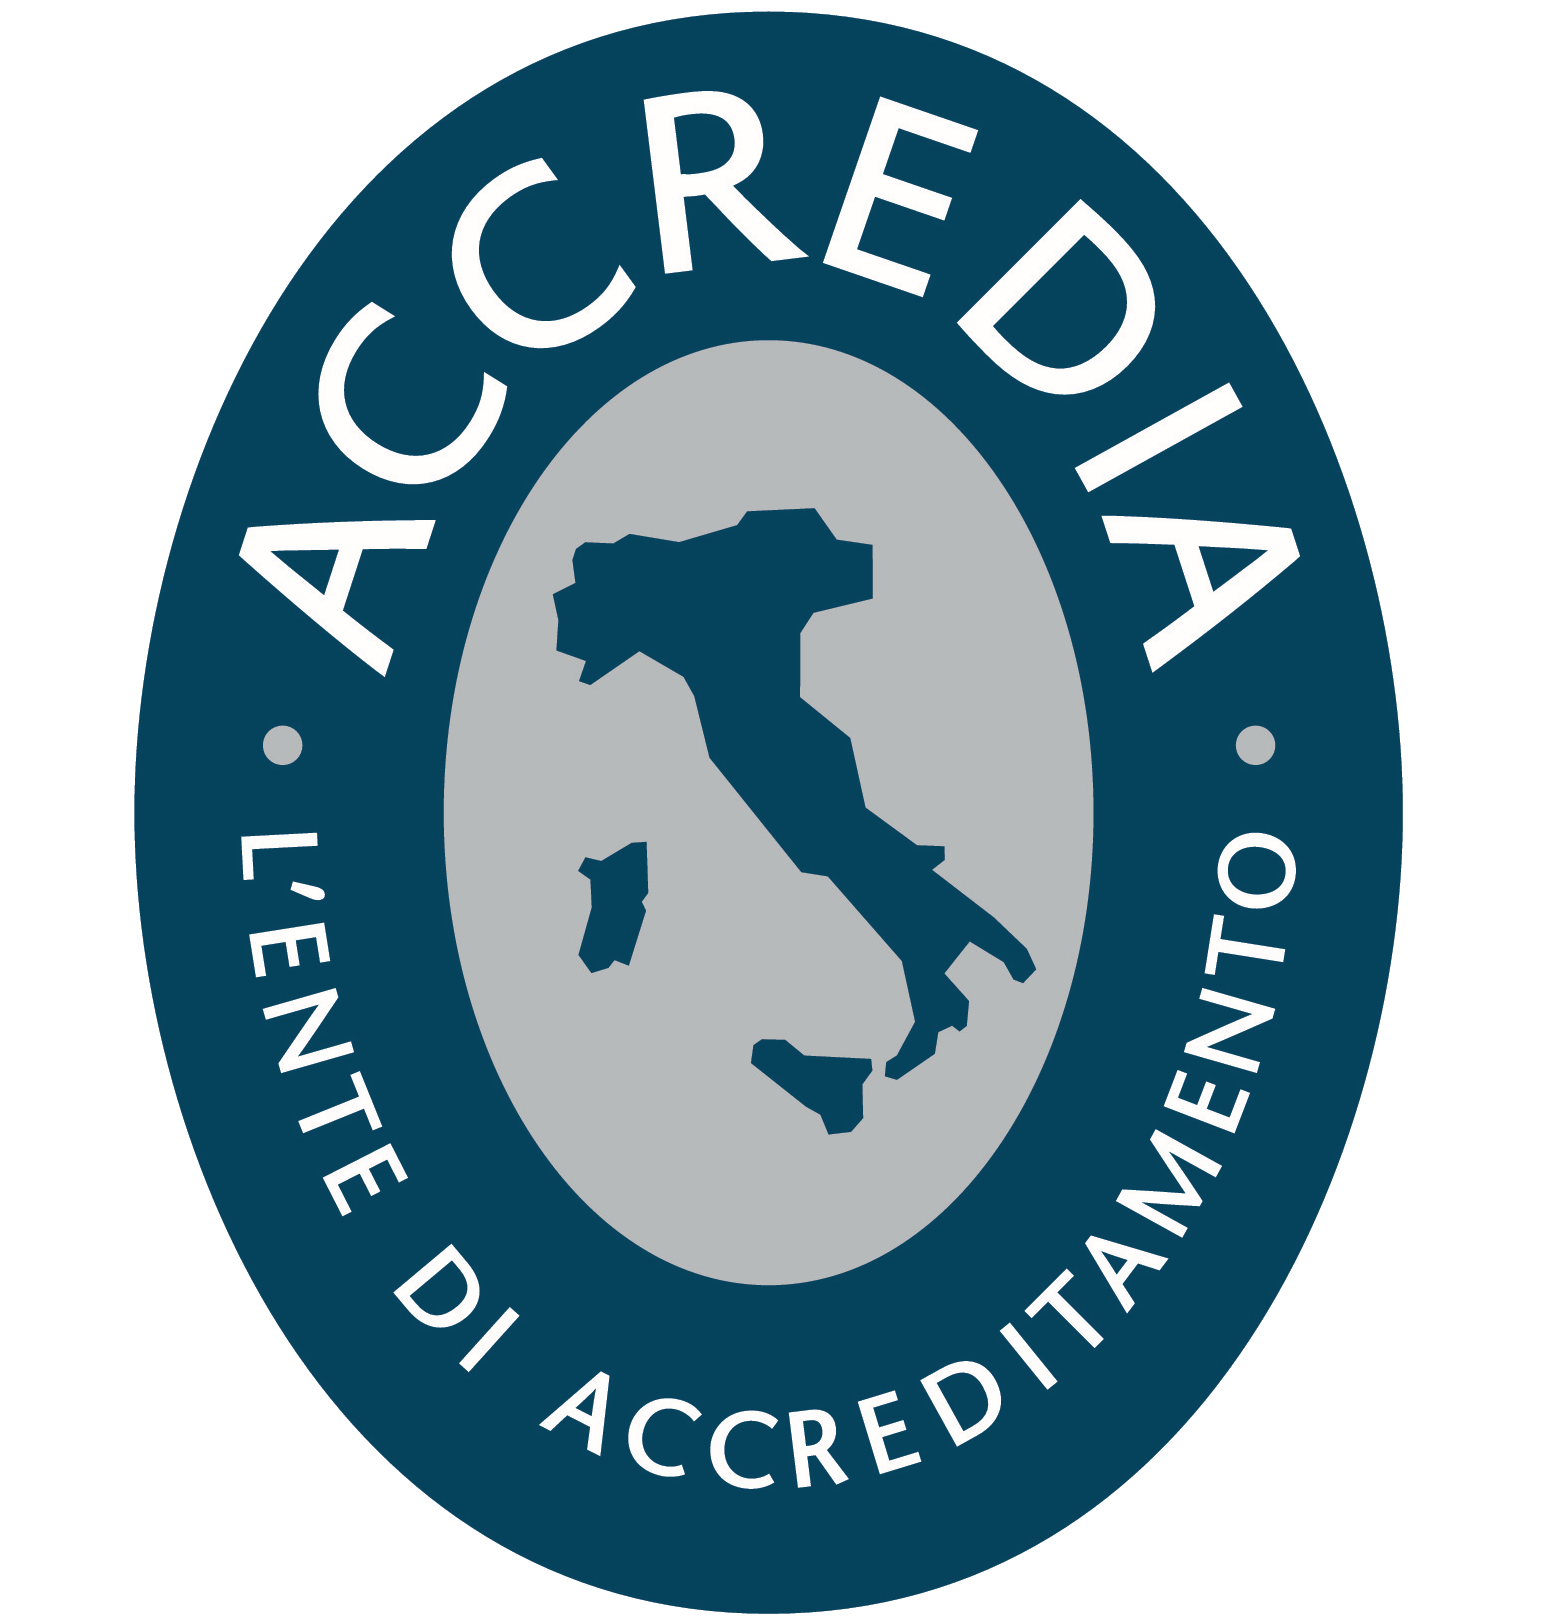 LOGO ACCREDIA.png